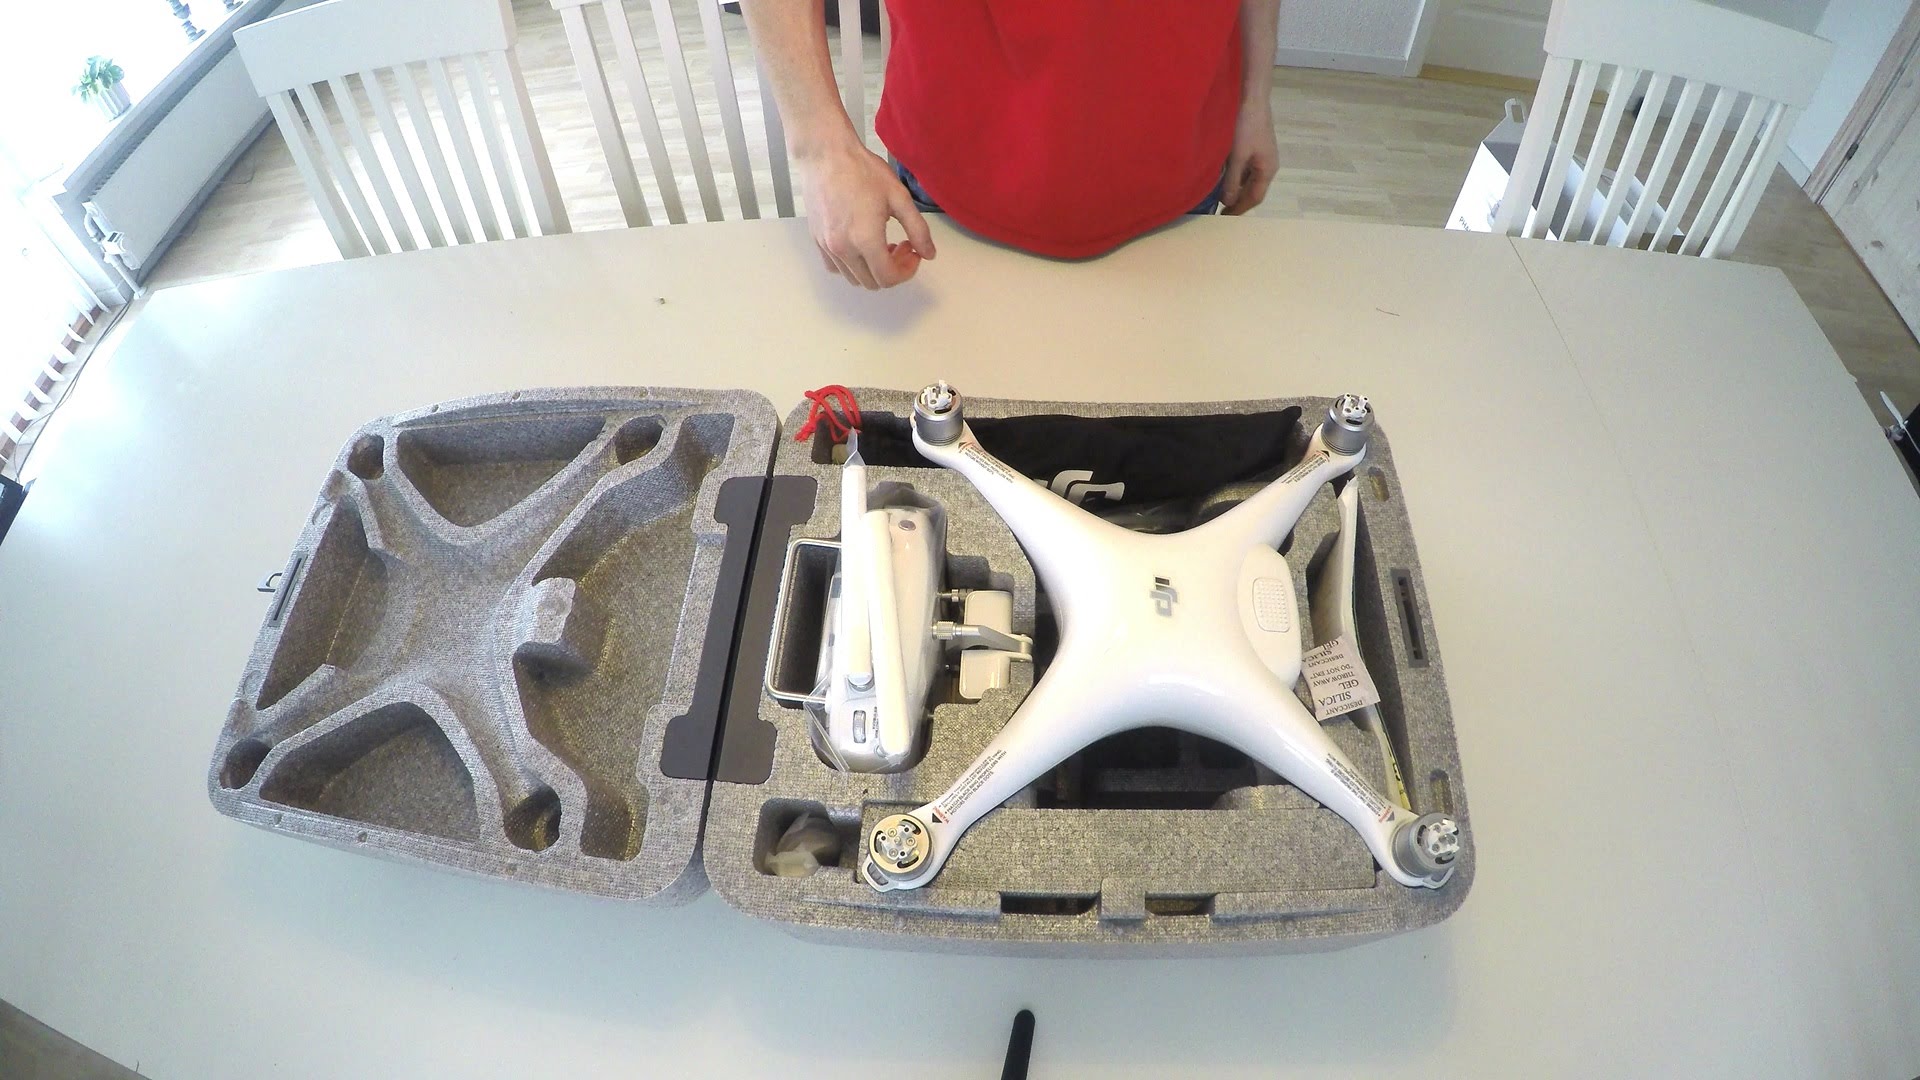 DJI PHANTOM 4: Complete Unboxing – What’s in the box?